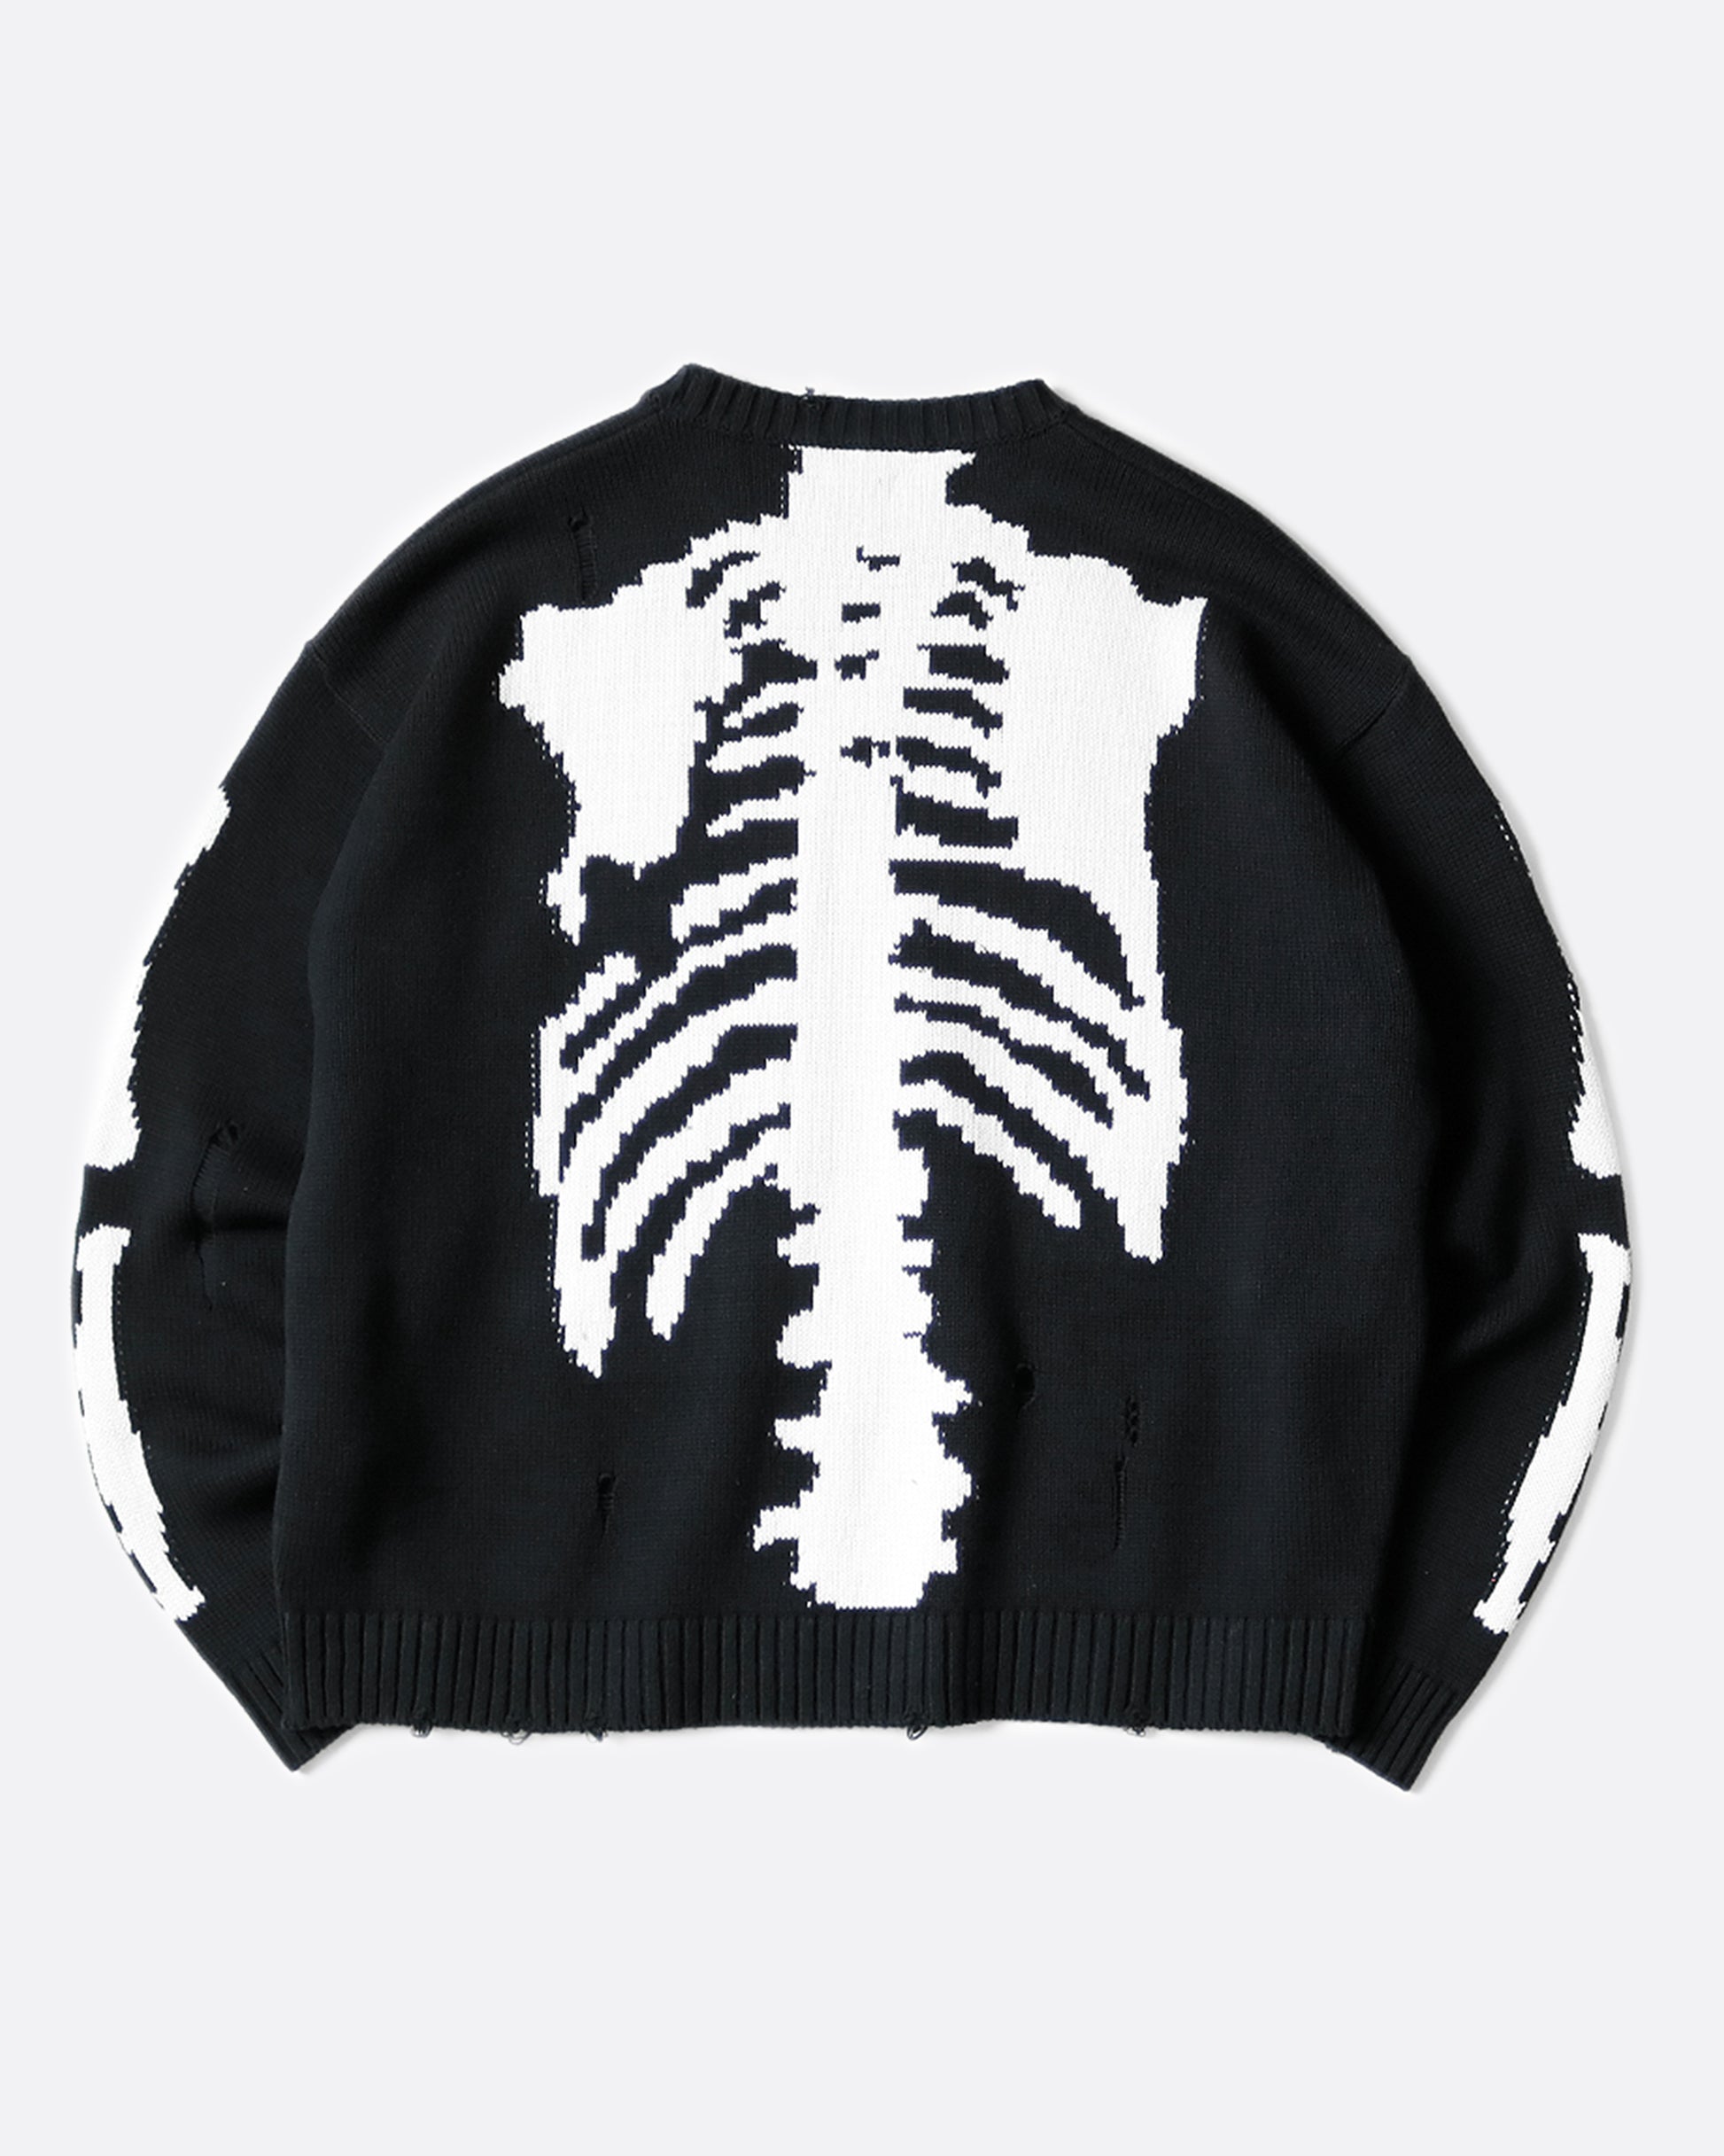 A distressed, black crewneck sweater with Kapital's beloved bone design on the back and sleeves.